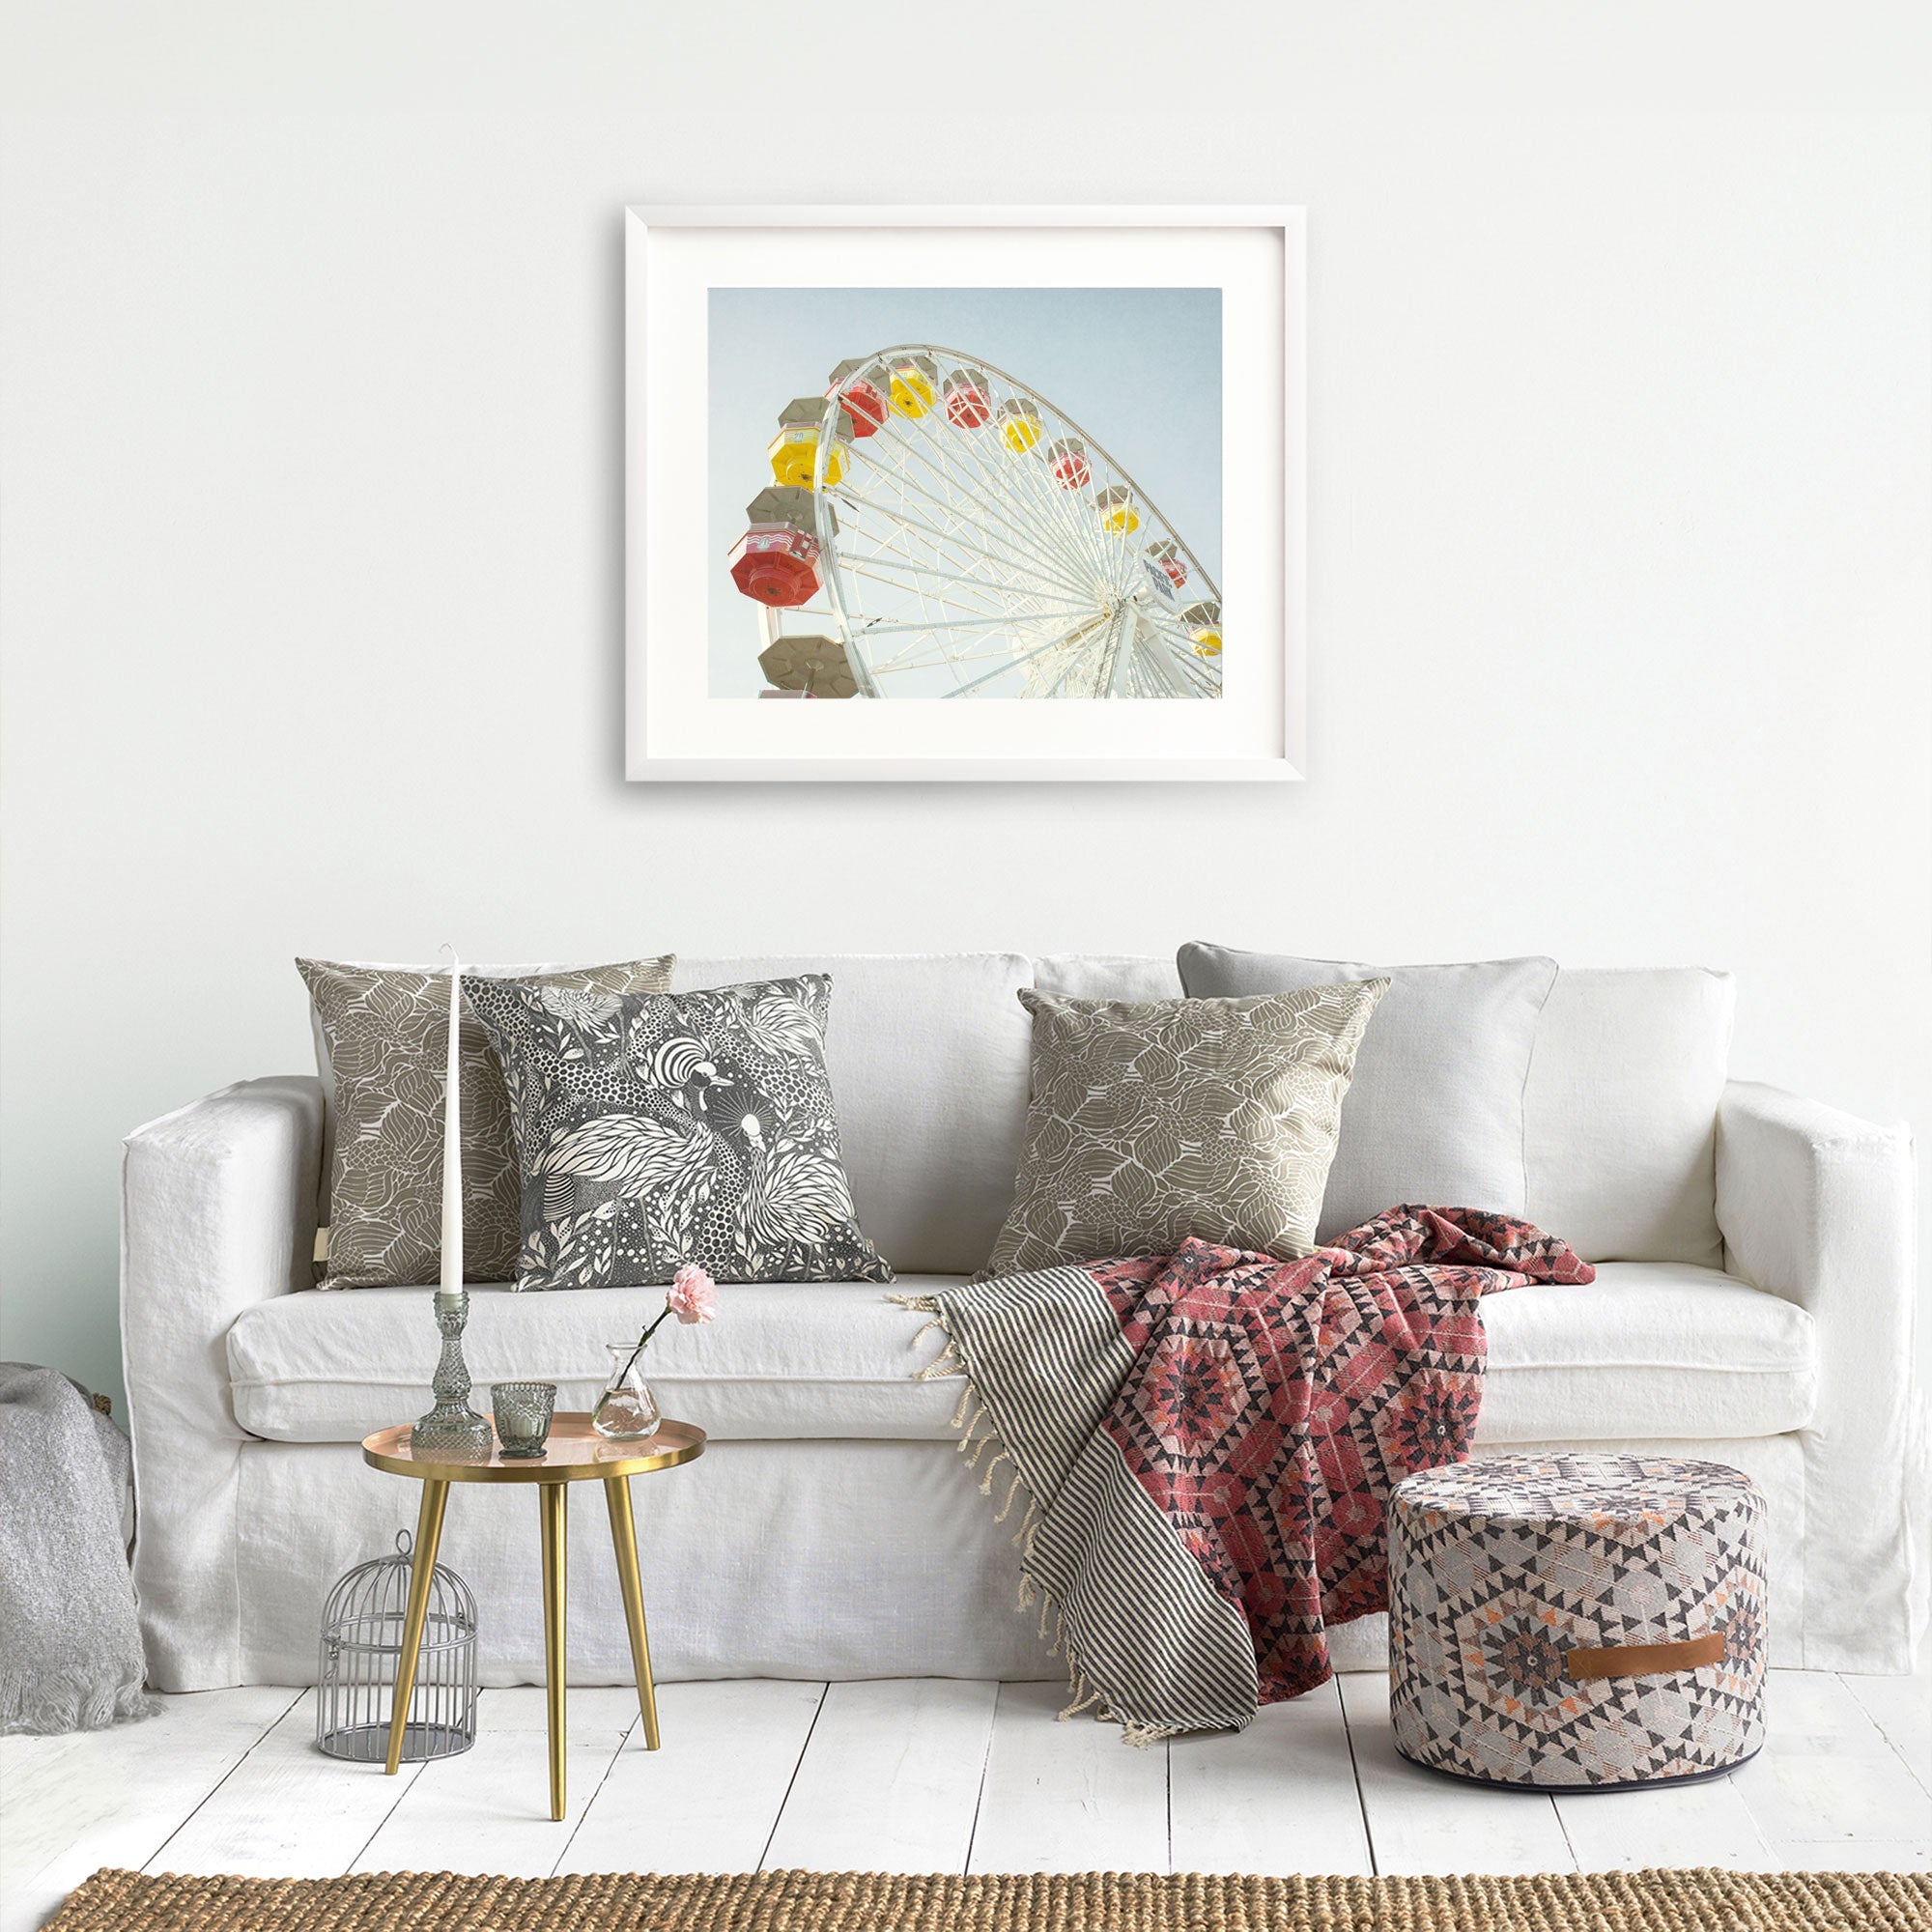 A cozy living room corner with a white sofa adorned with patterned cushions, a red throw blanket, and a small round gold table with a pink rose in a vase. A framed picture of the Offley Green Santa Monica Ferris Wheel Print, 'Ferris Above'